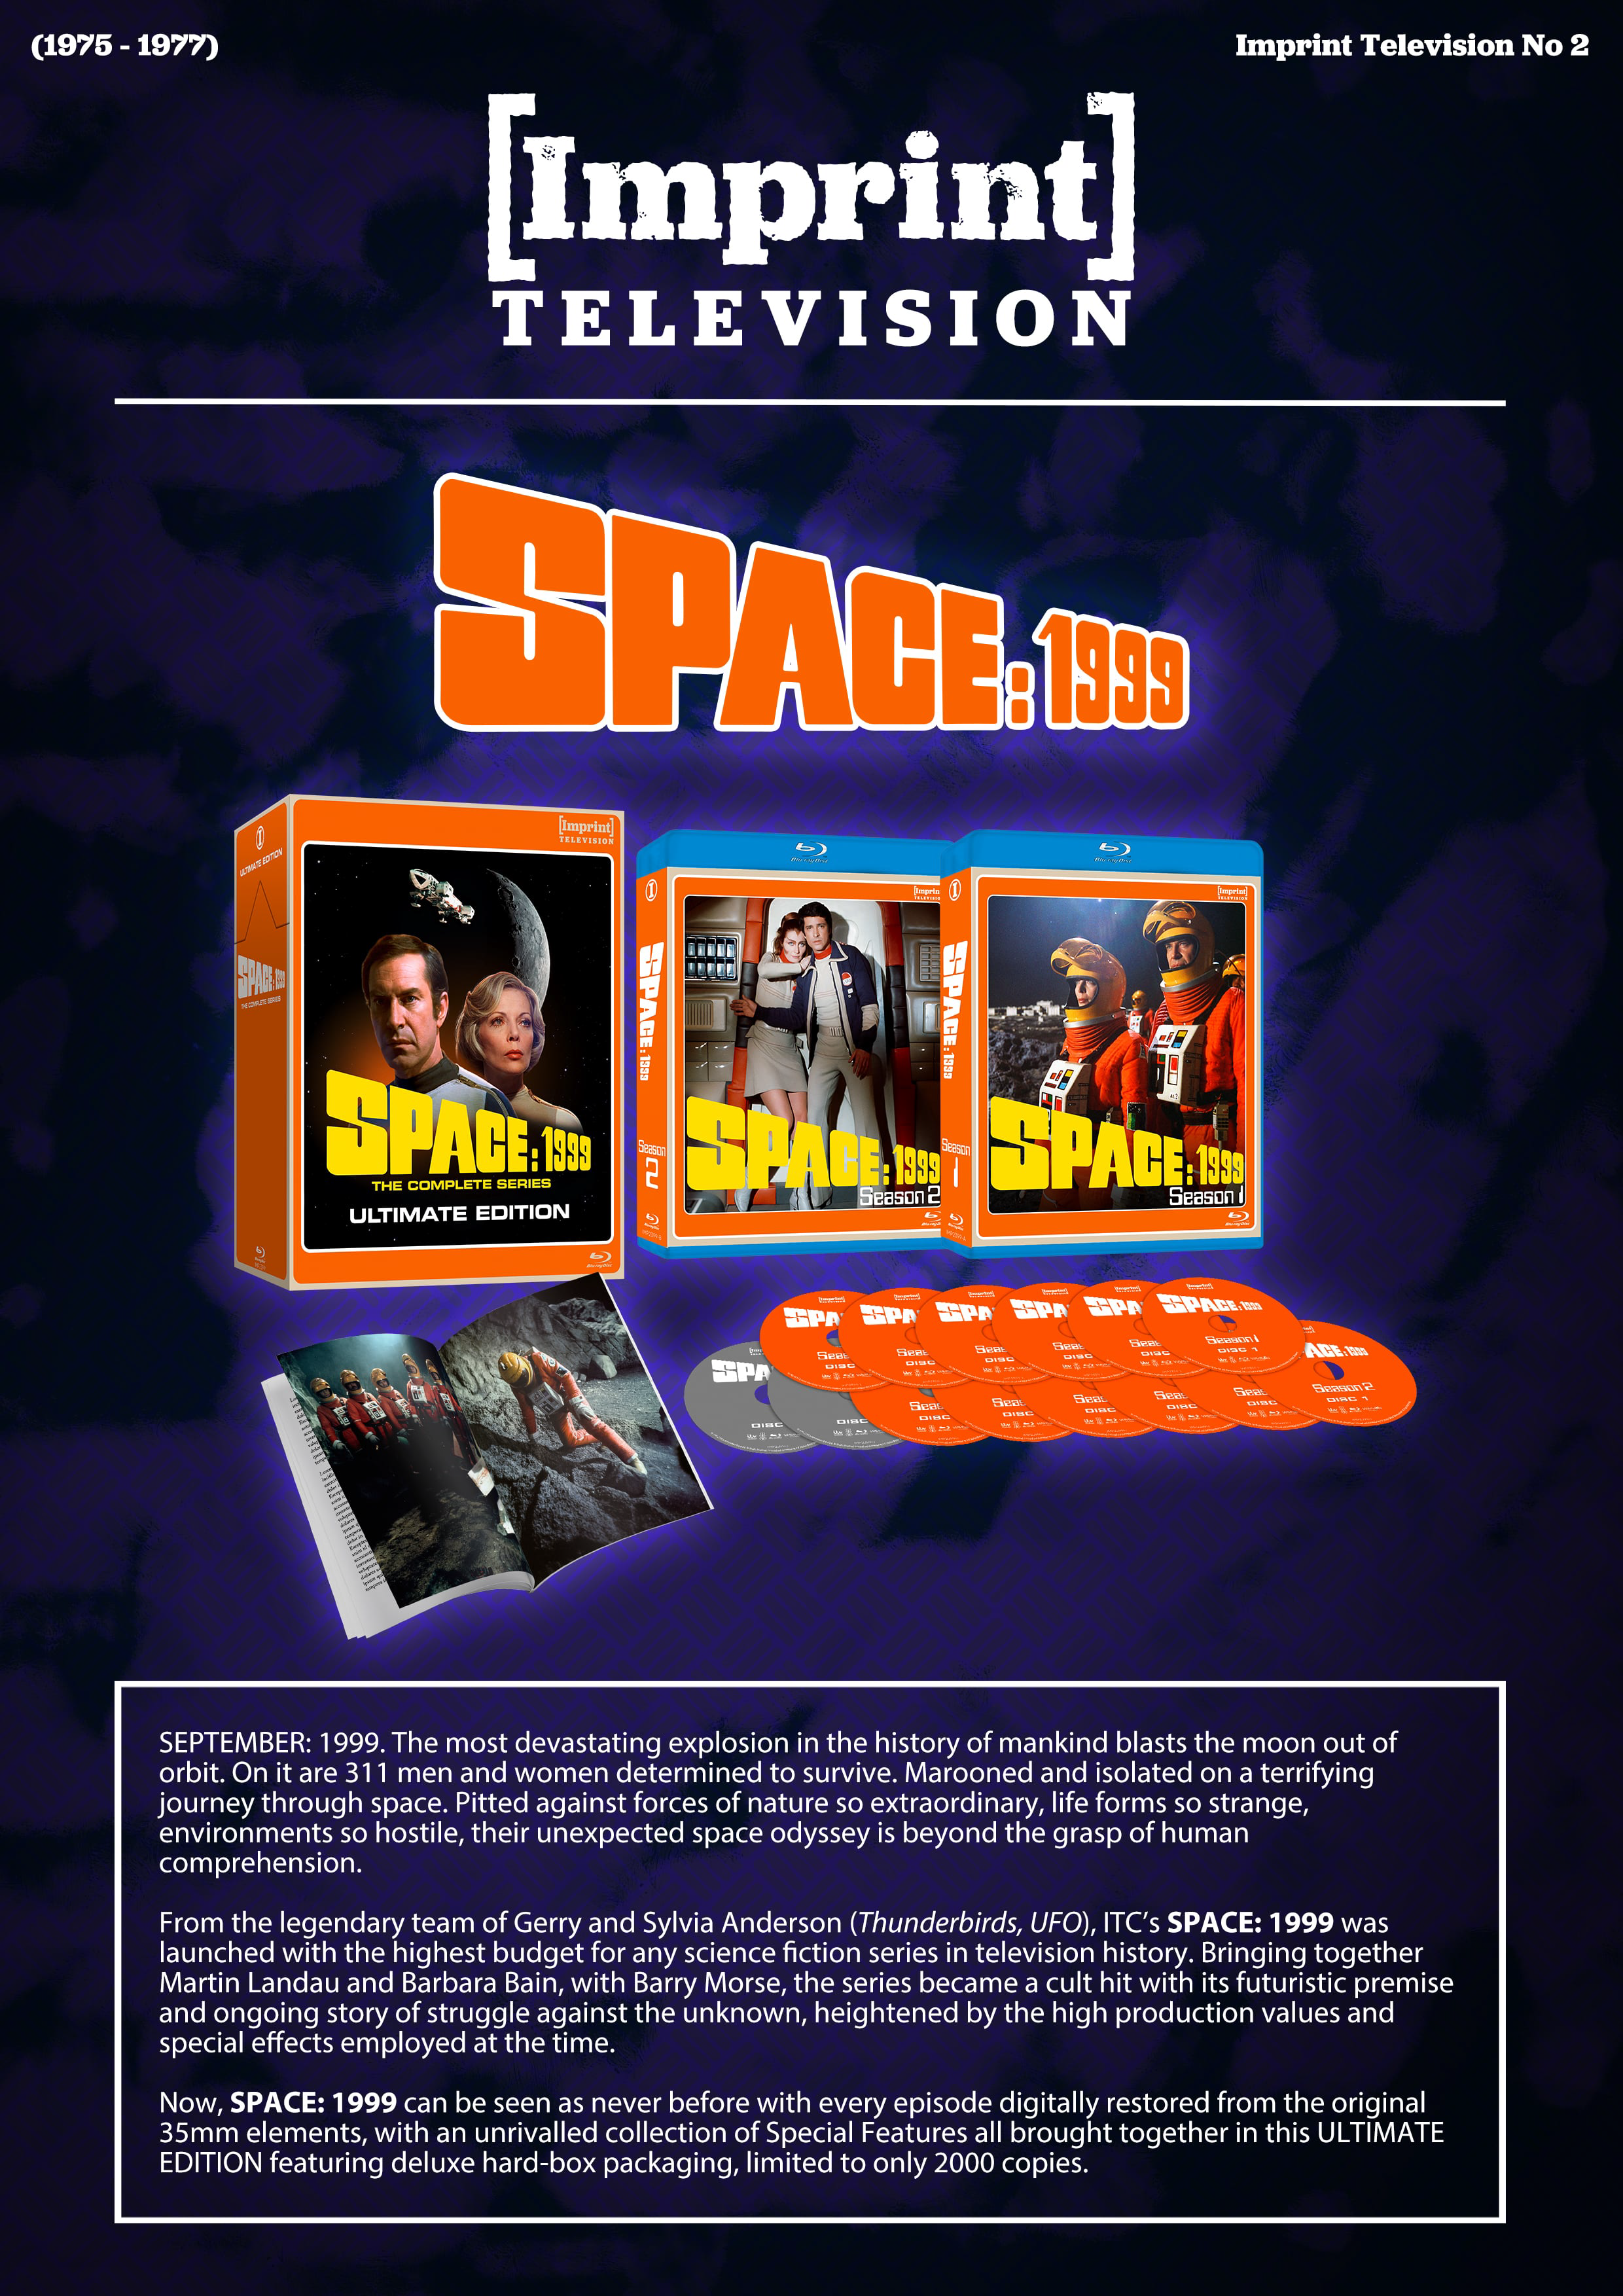 ImprintTV - Space 1999 (1)-1.png